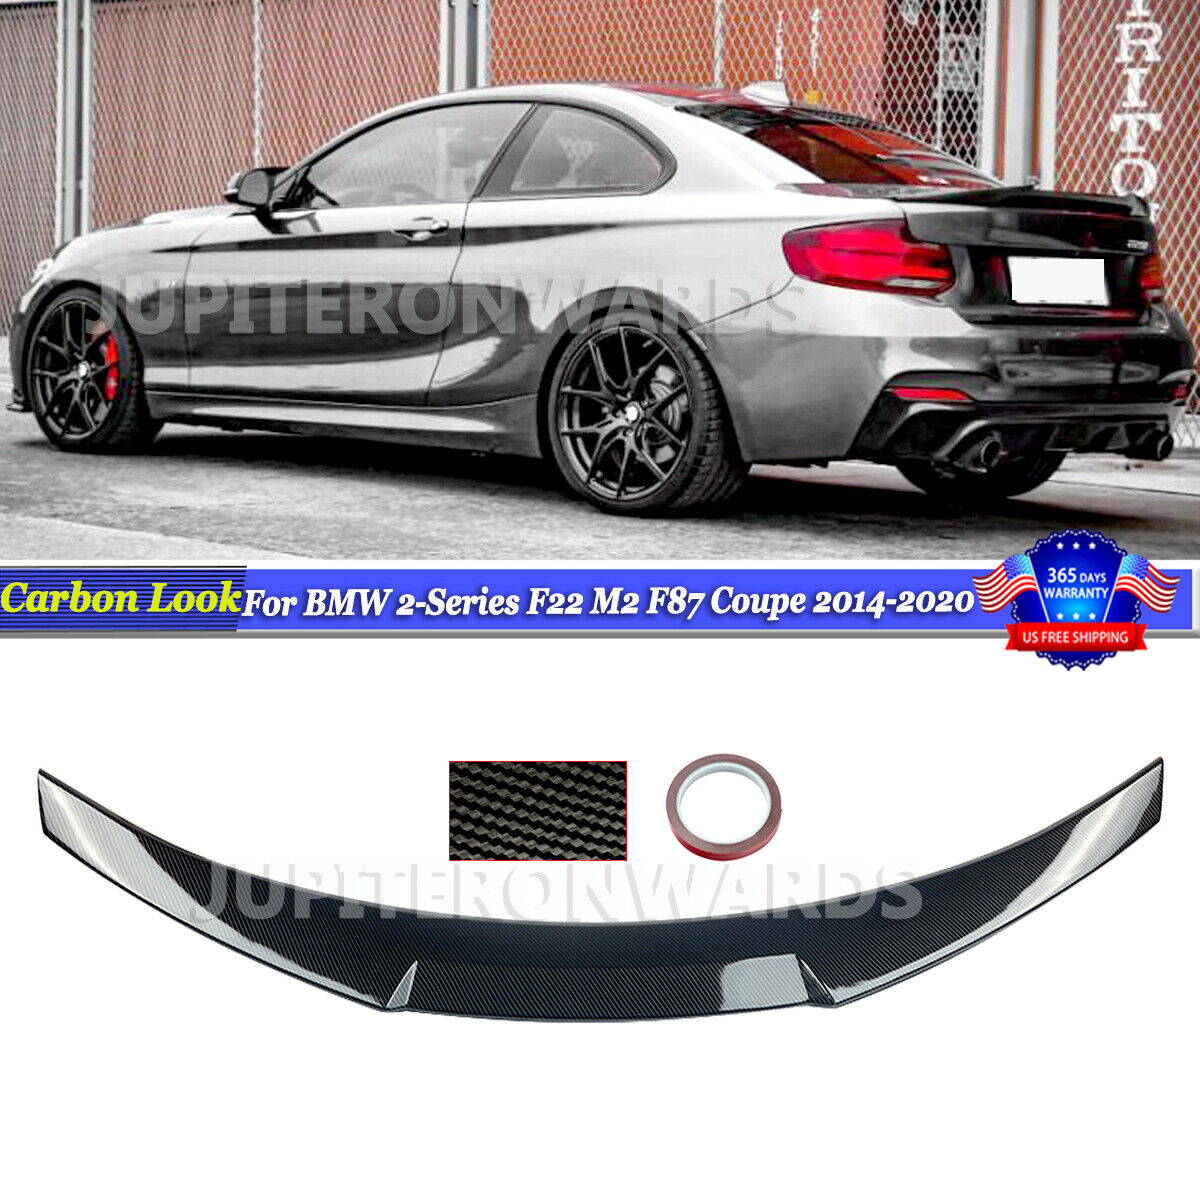 M4 Style Carbon Look Rear Spoiler Trunk Lip For BMW F22 230i M235I M240I M2 F87